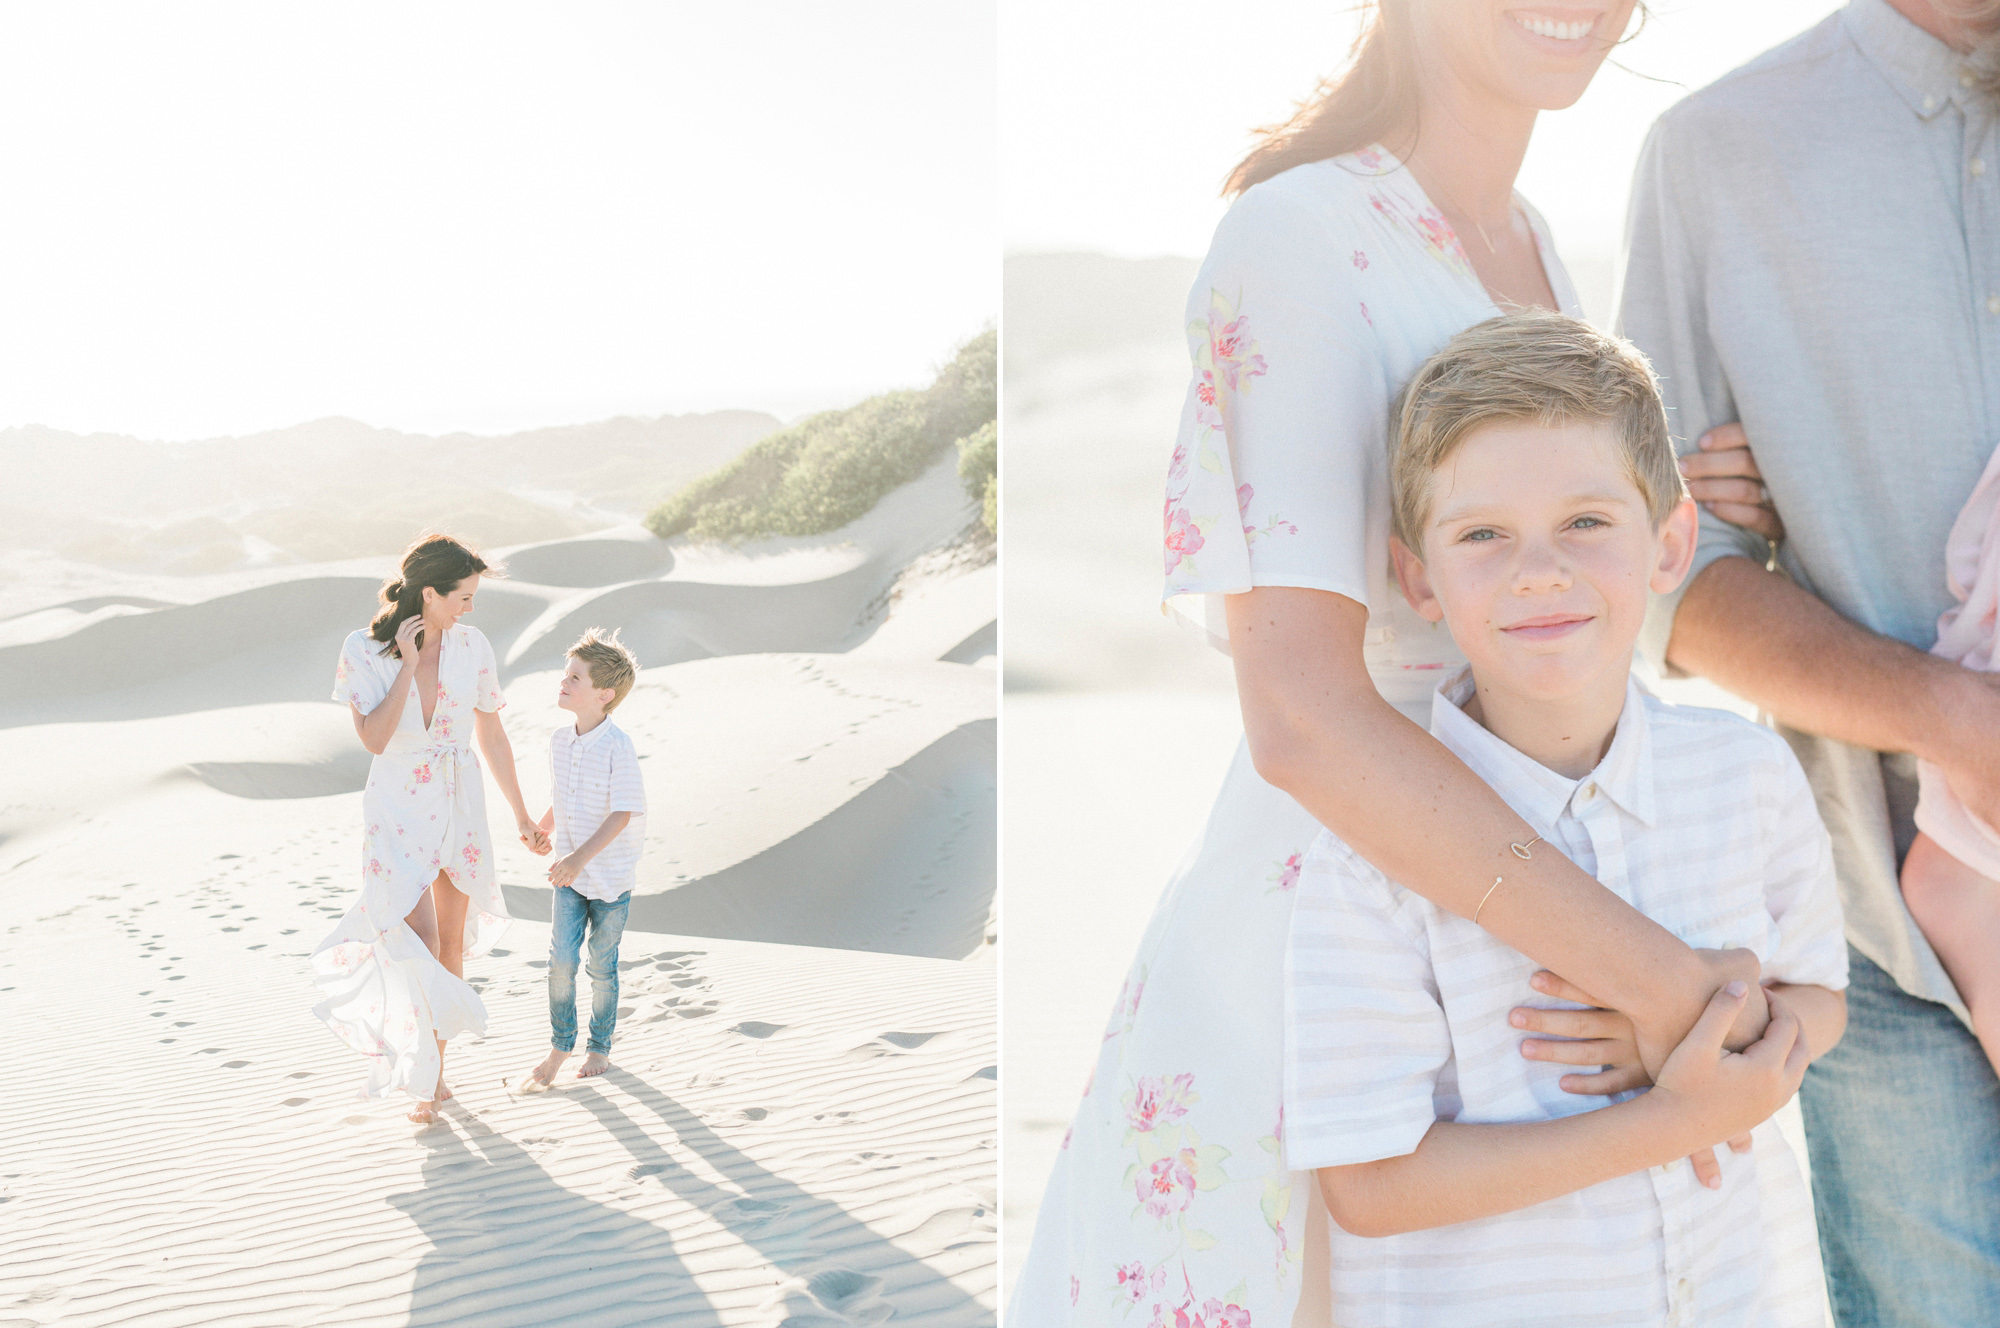 Dreamy natural light in this family session in Santa Barbara.